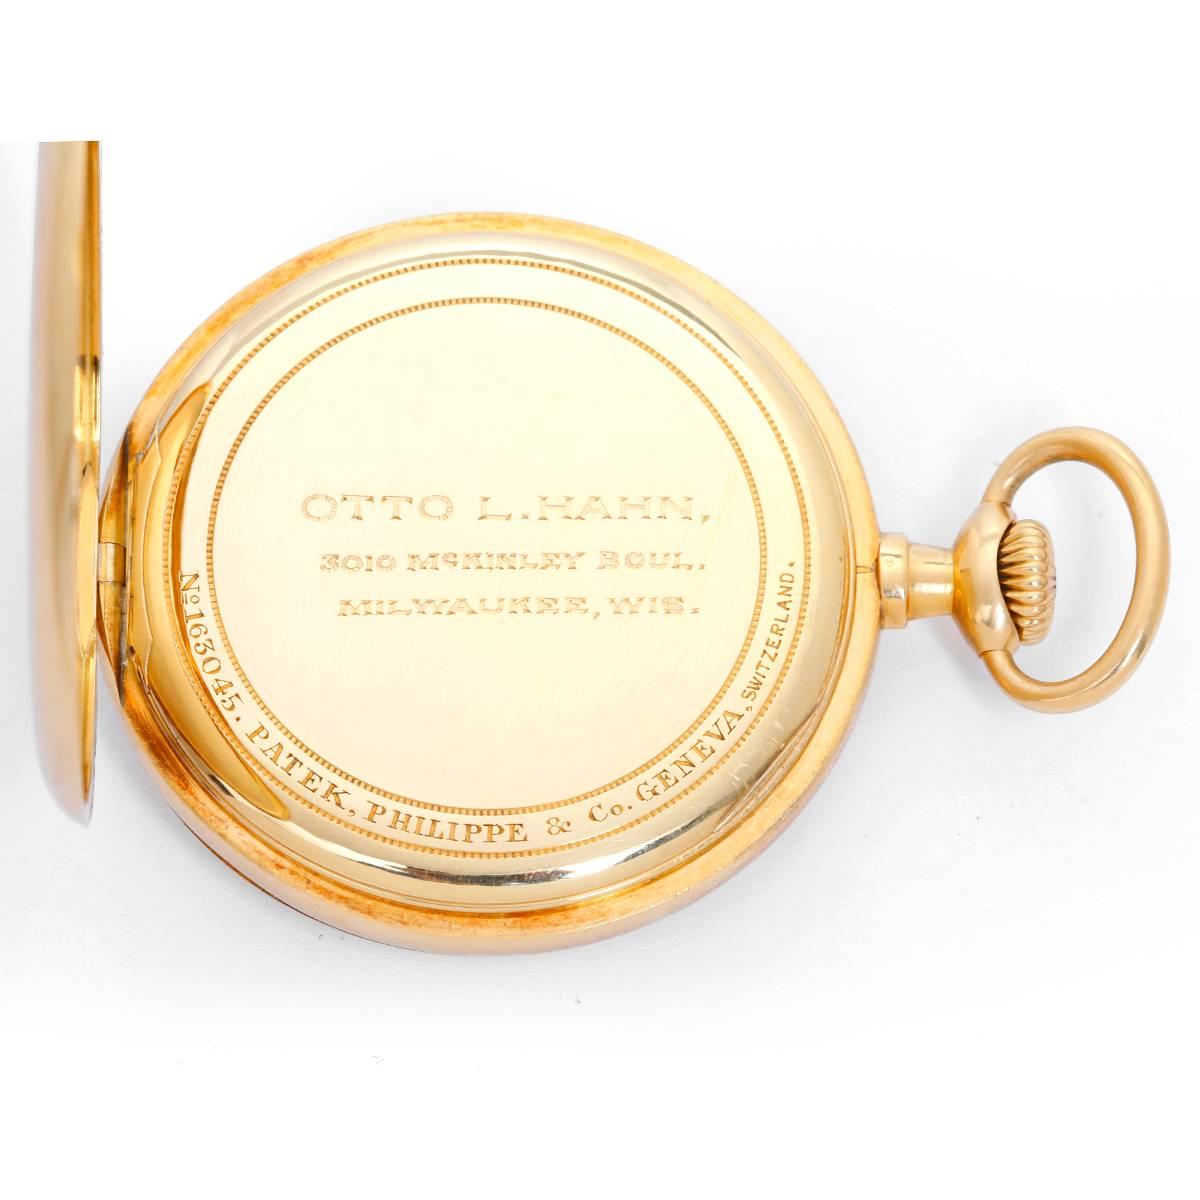 Patek Philippe & Co. 18K Yellow Gold Open Face Dress Pocket Watch -  Manual Winding. 18K Yellow Gold signed Patek Philippe & Co. ( 45 mm ). White enamel with Arabic numerals; red minute numerals; sub dial at 6 o'clock. Pre-owned. Circa 1912.